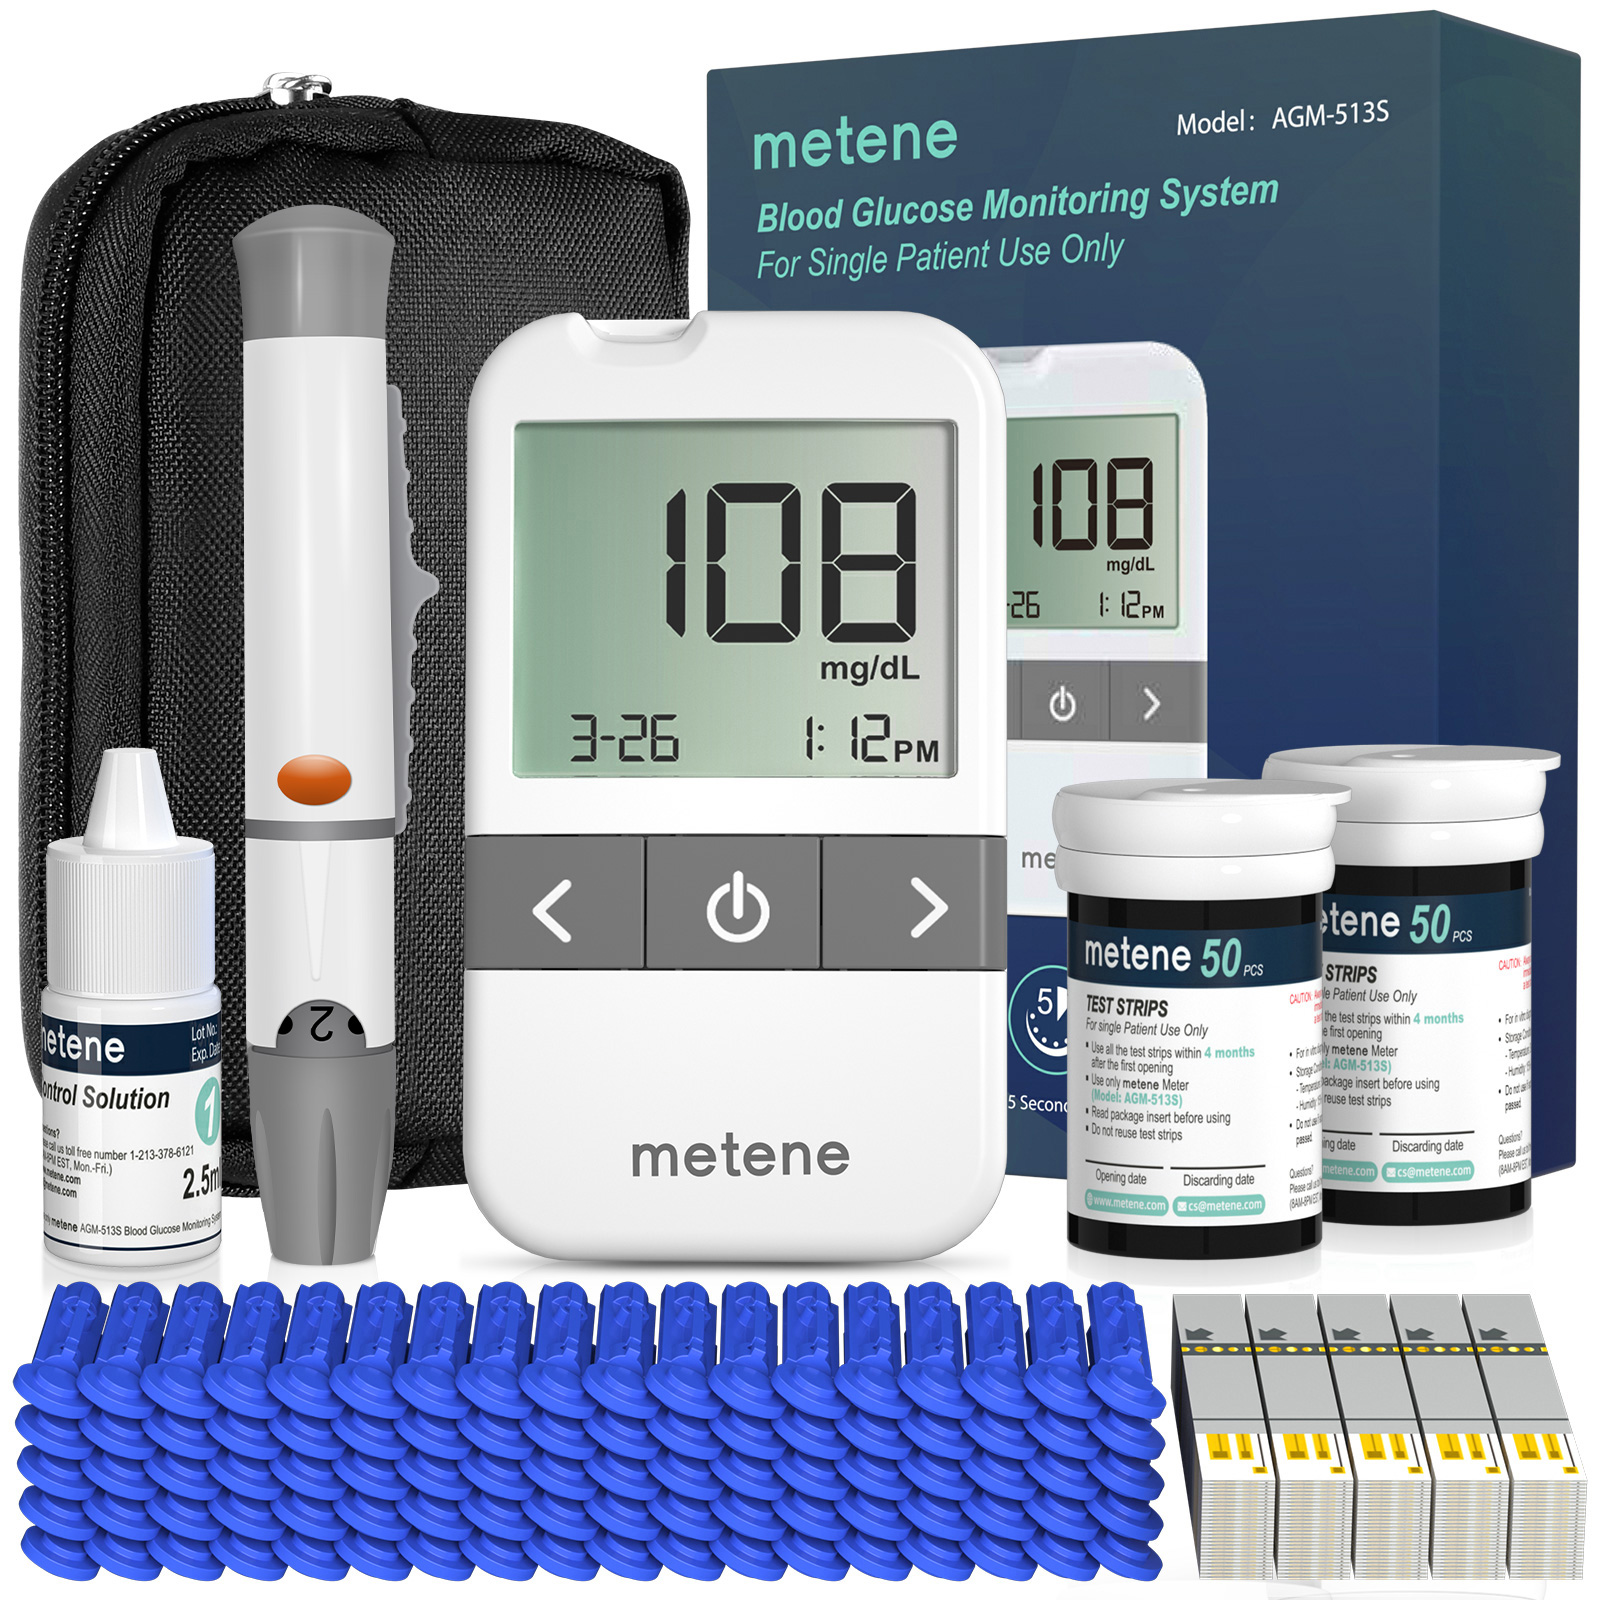 Metene AGM-513S Blood Glucose Monitor Kit, 100 Glucometer Strips, 100 Lancets, 1 Blood Sugar Monitor, 1 Control Solution, Lancing Device and Carrying Bag, No Coding - image 1 of 7